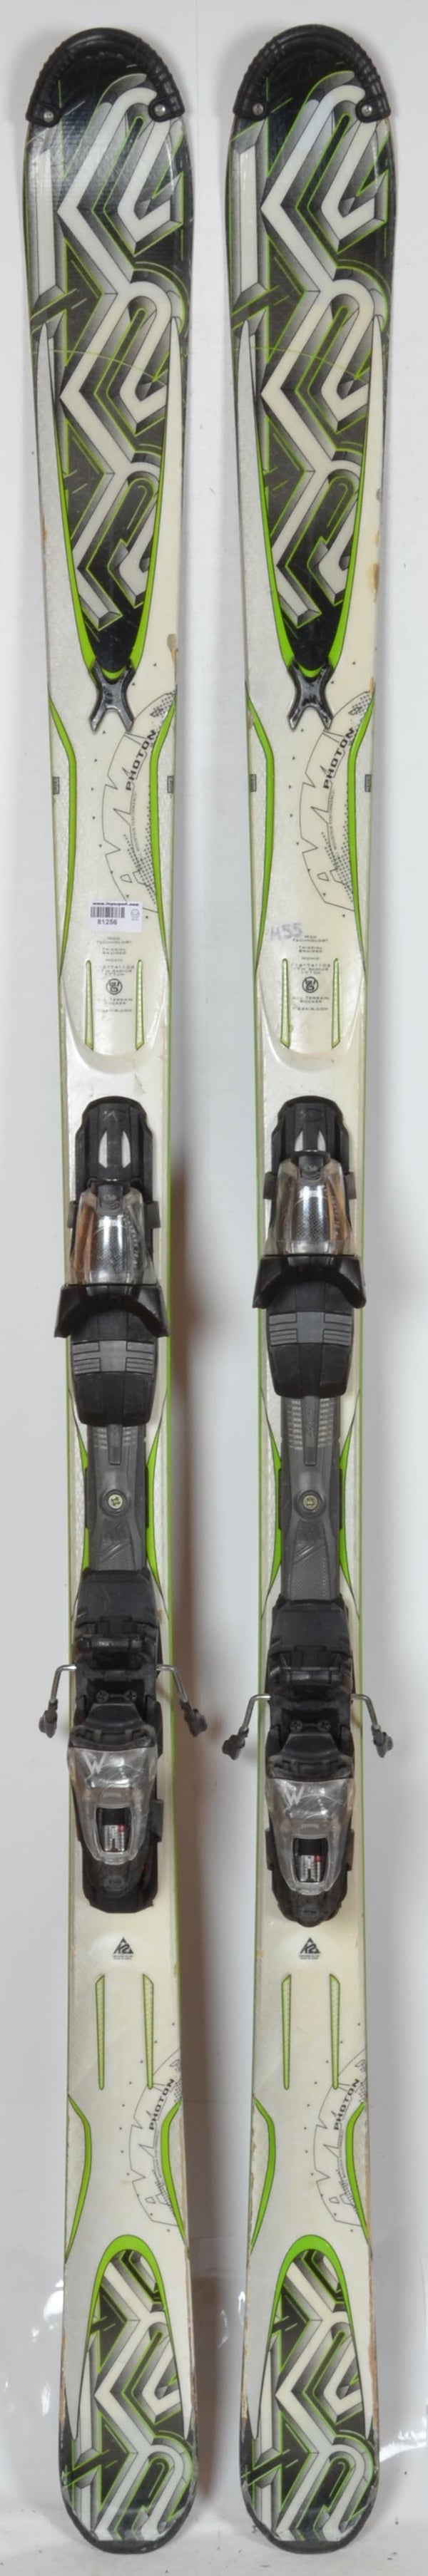 K2 AMP PHOTON - skis d'occasion